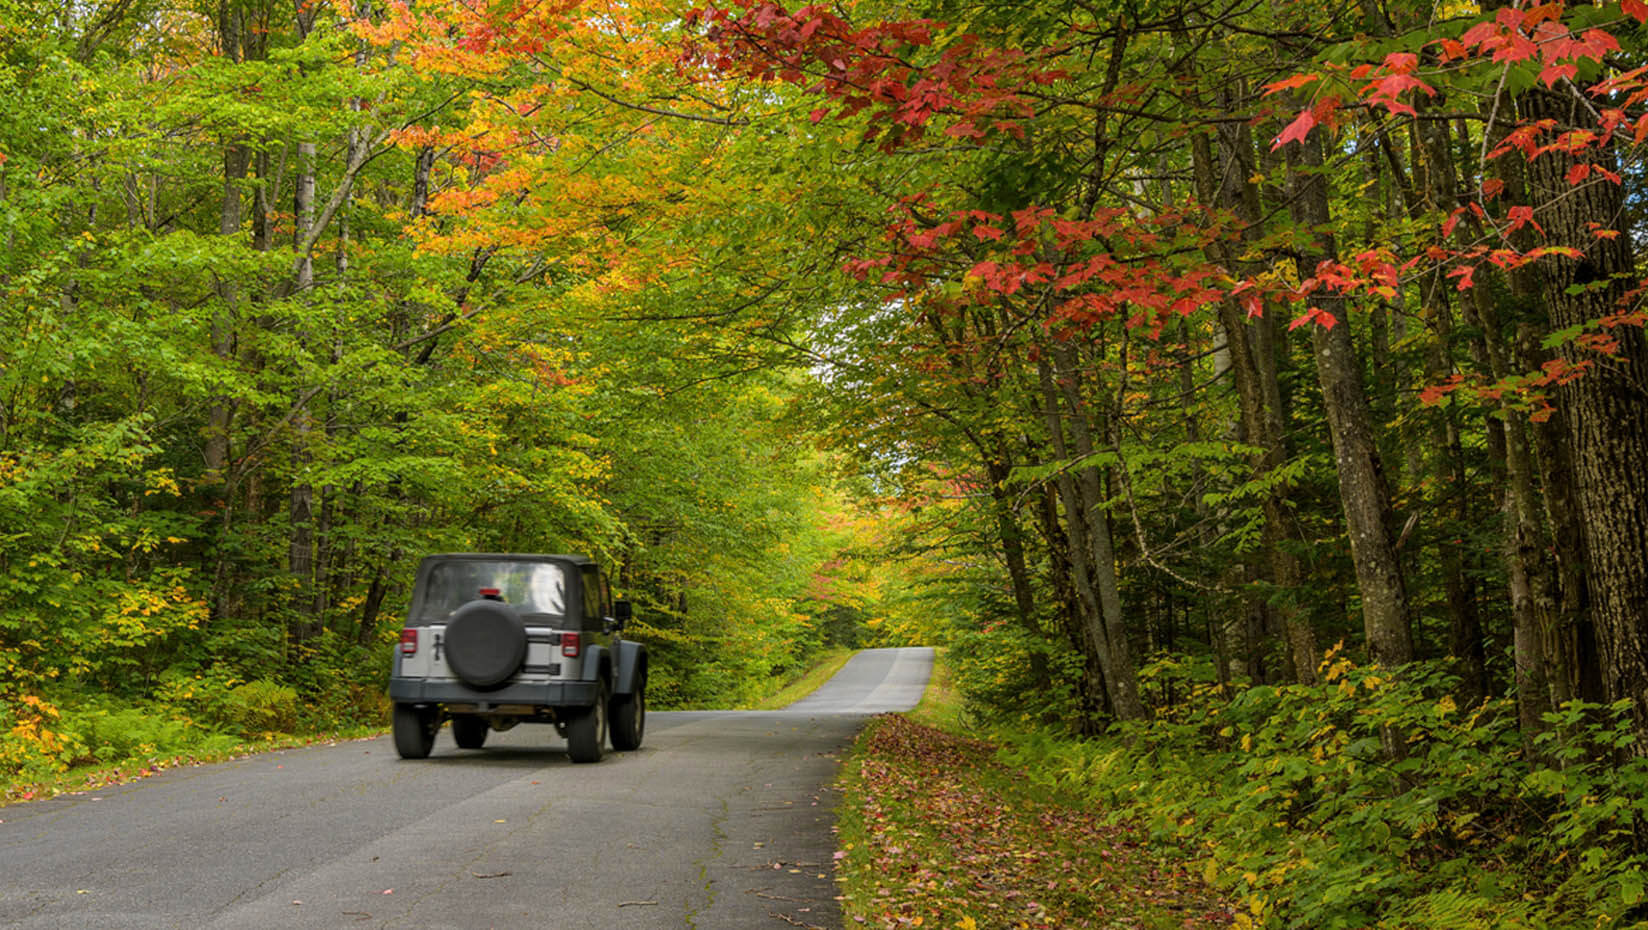 A photo of a Jeep driving on a rural Maine road